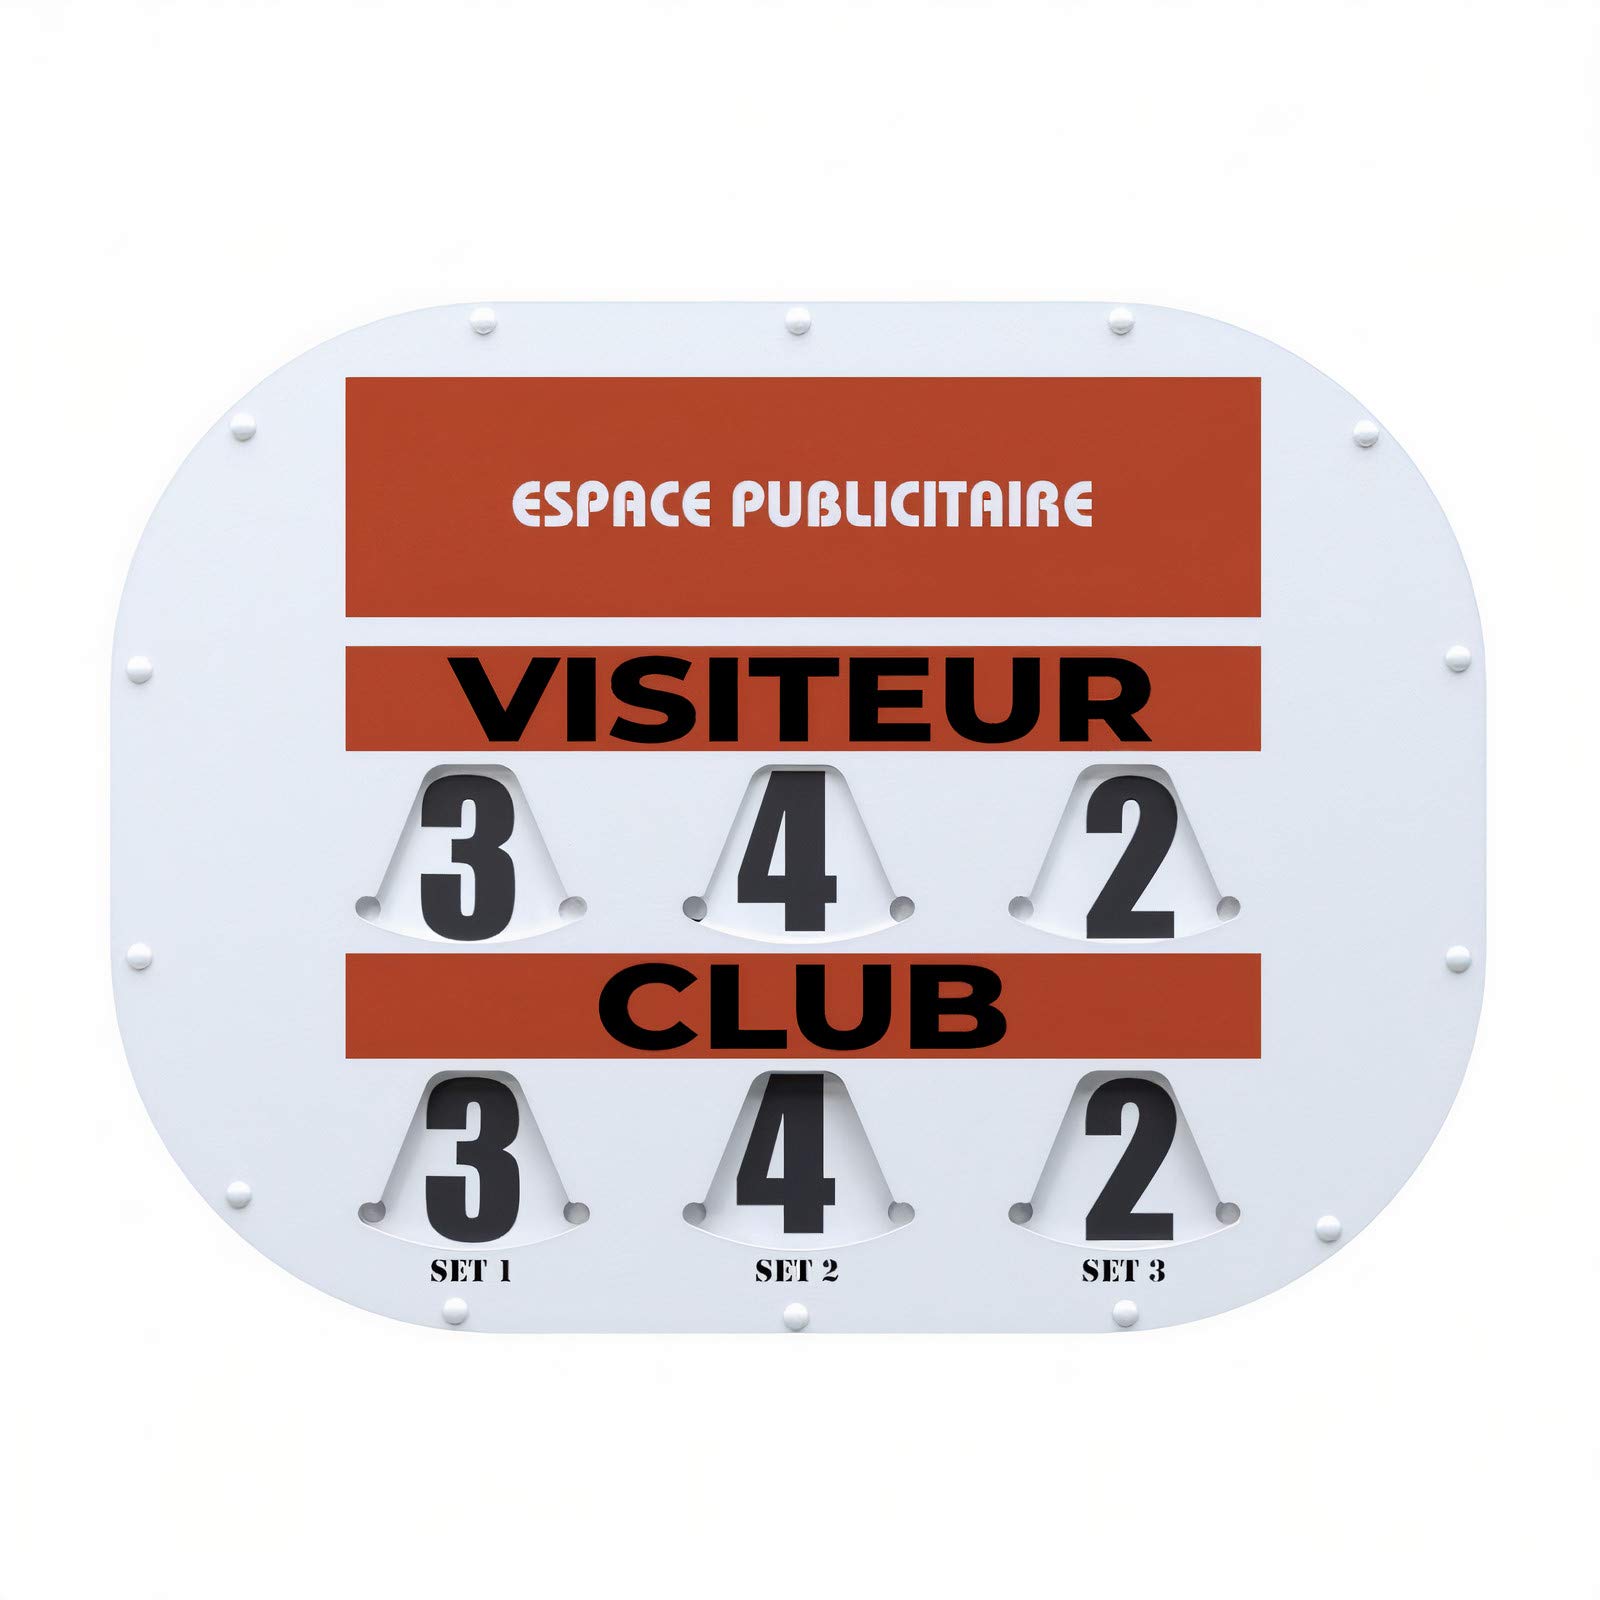 Tennis Scorer, Manual display with rotating discs (80x60 Cliptec) made in France in PVC and guaranteed for 2 years, designed with an advertising space to make your club profitable